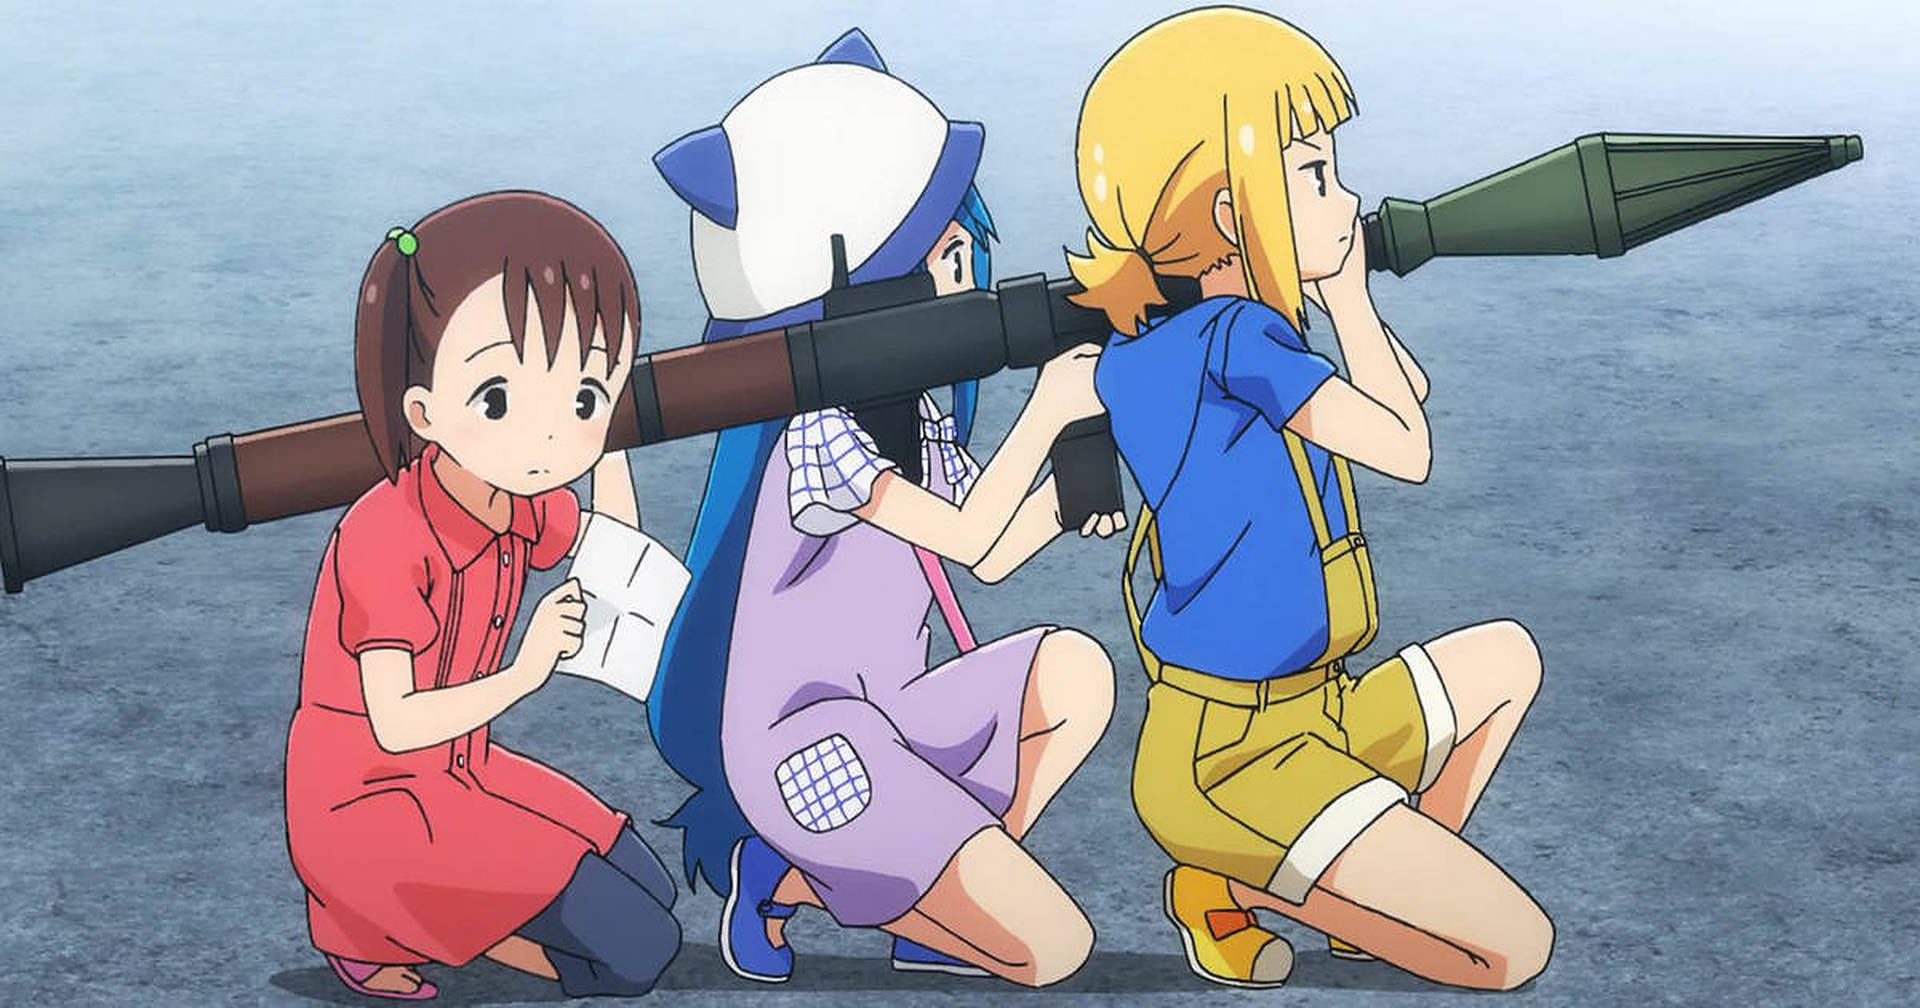 Anime Kids With Rocket Launcher Background